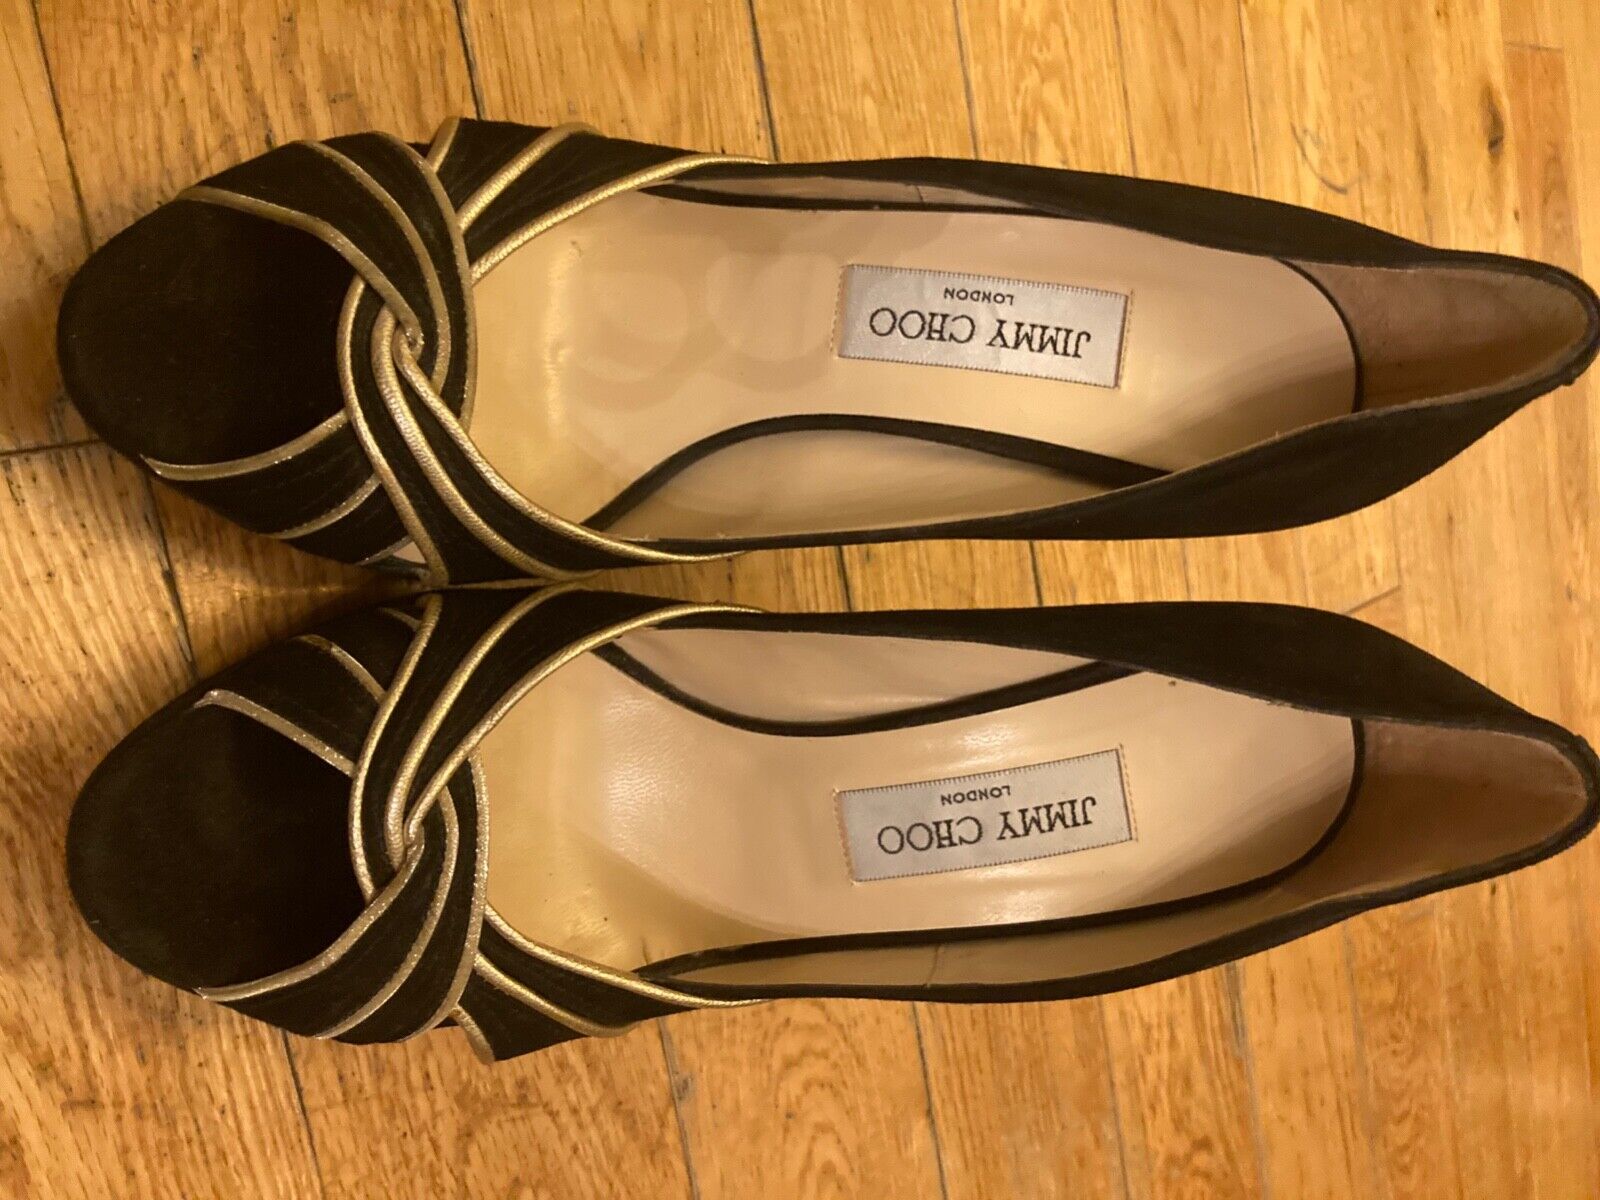 Jimmy Choo black and gold suede shoes 39 1/2 